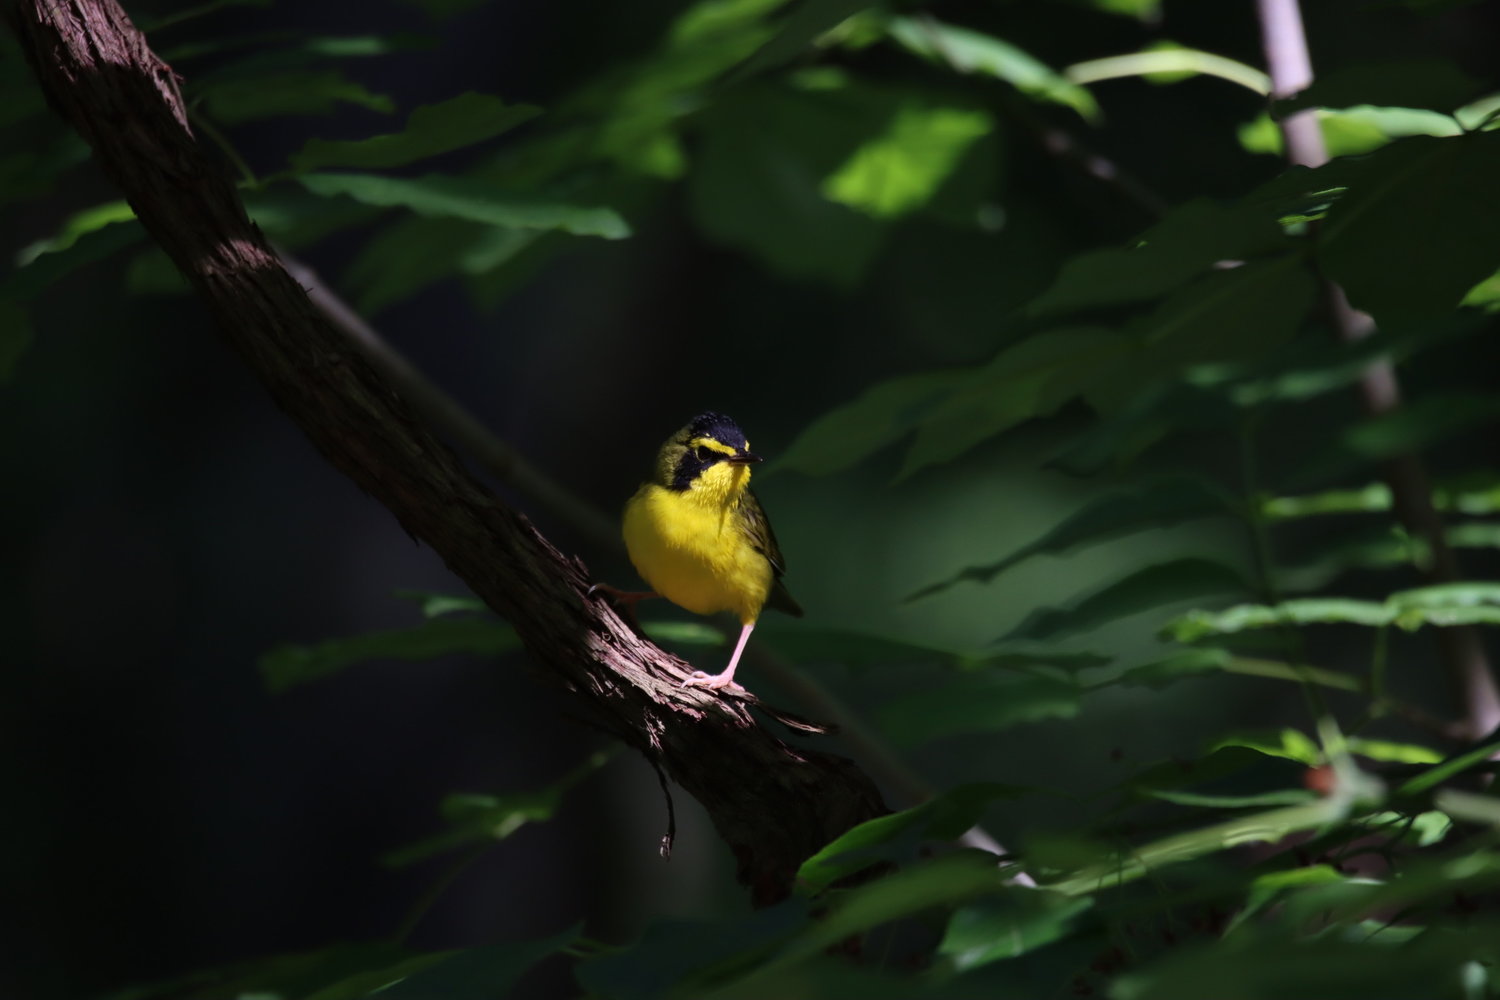 A Kentucky Warbler rests on a branch at Shades State Park.